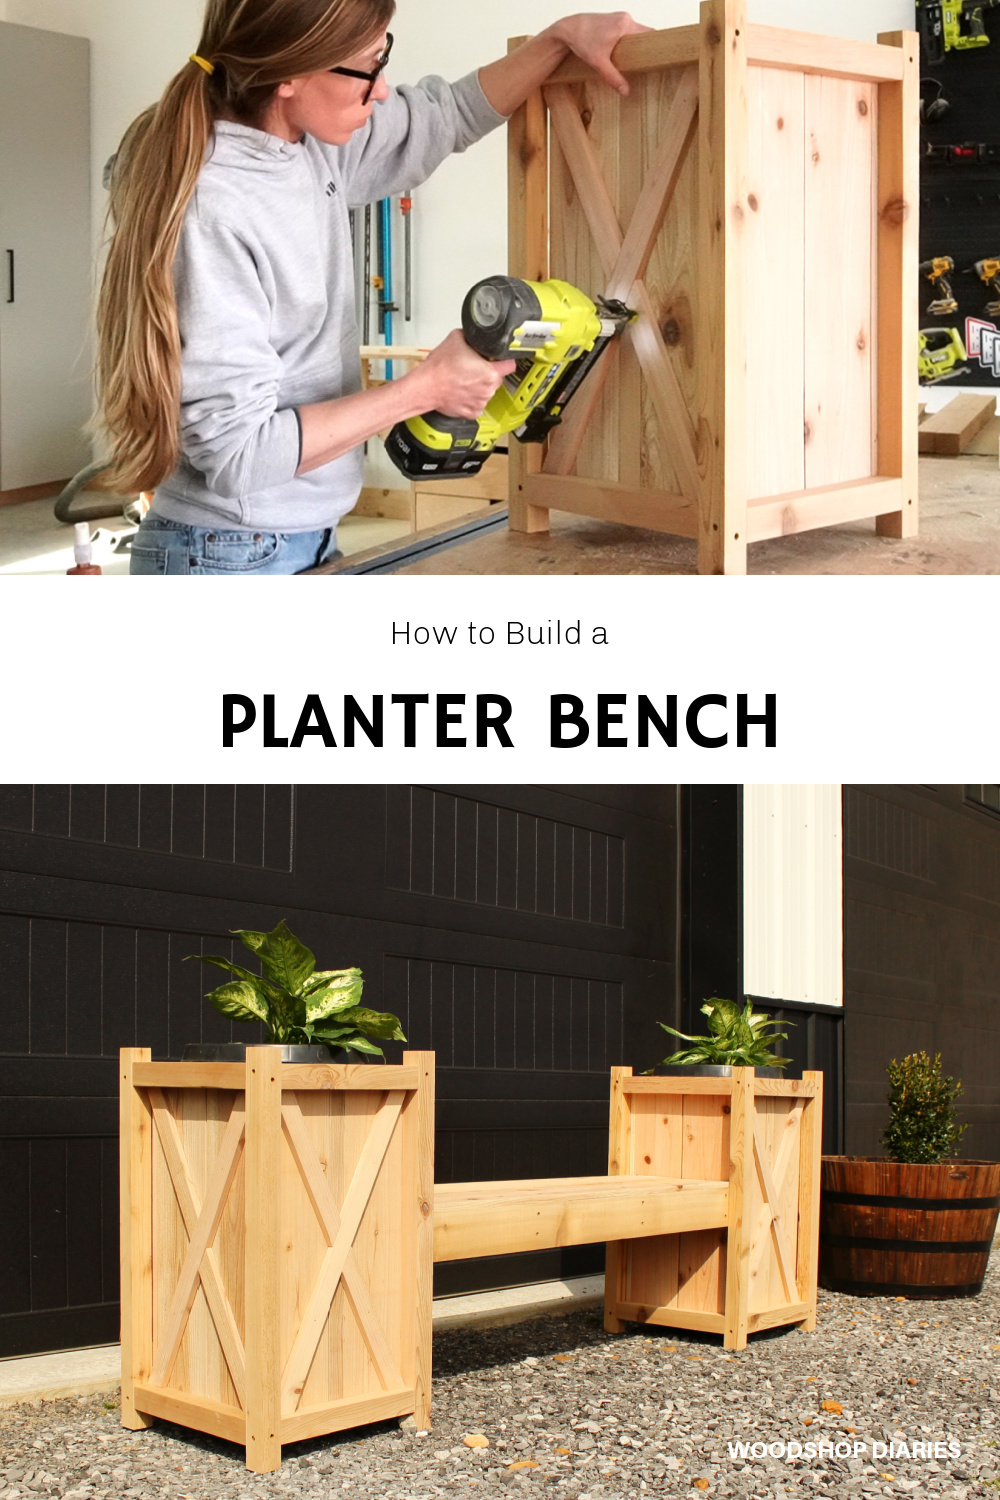 Pinterest collage image showing Shara installing X trim onto planters and completed DIY wooden planter bench at bottom with text "how to build a planter bench"